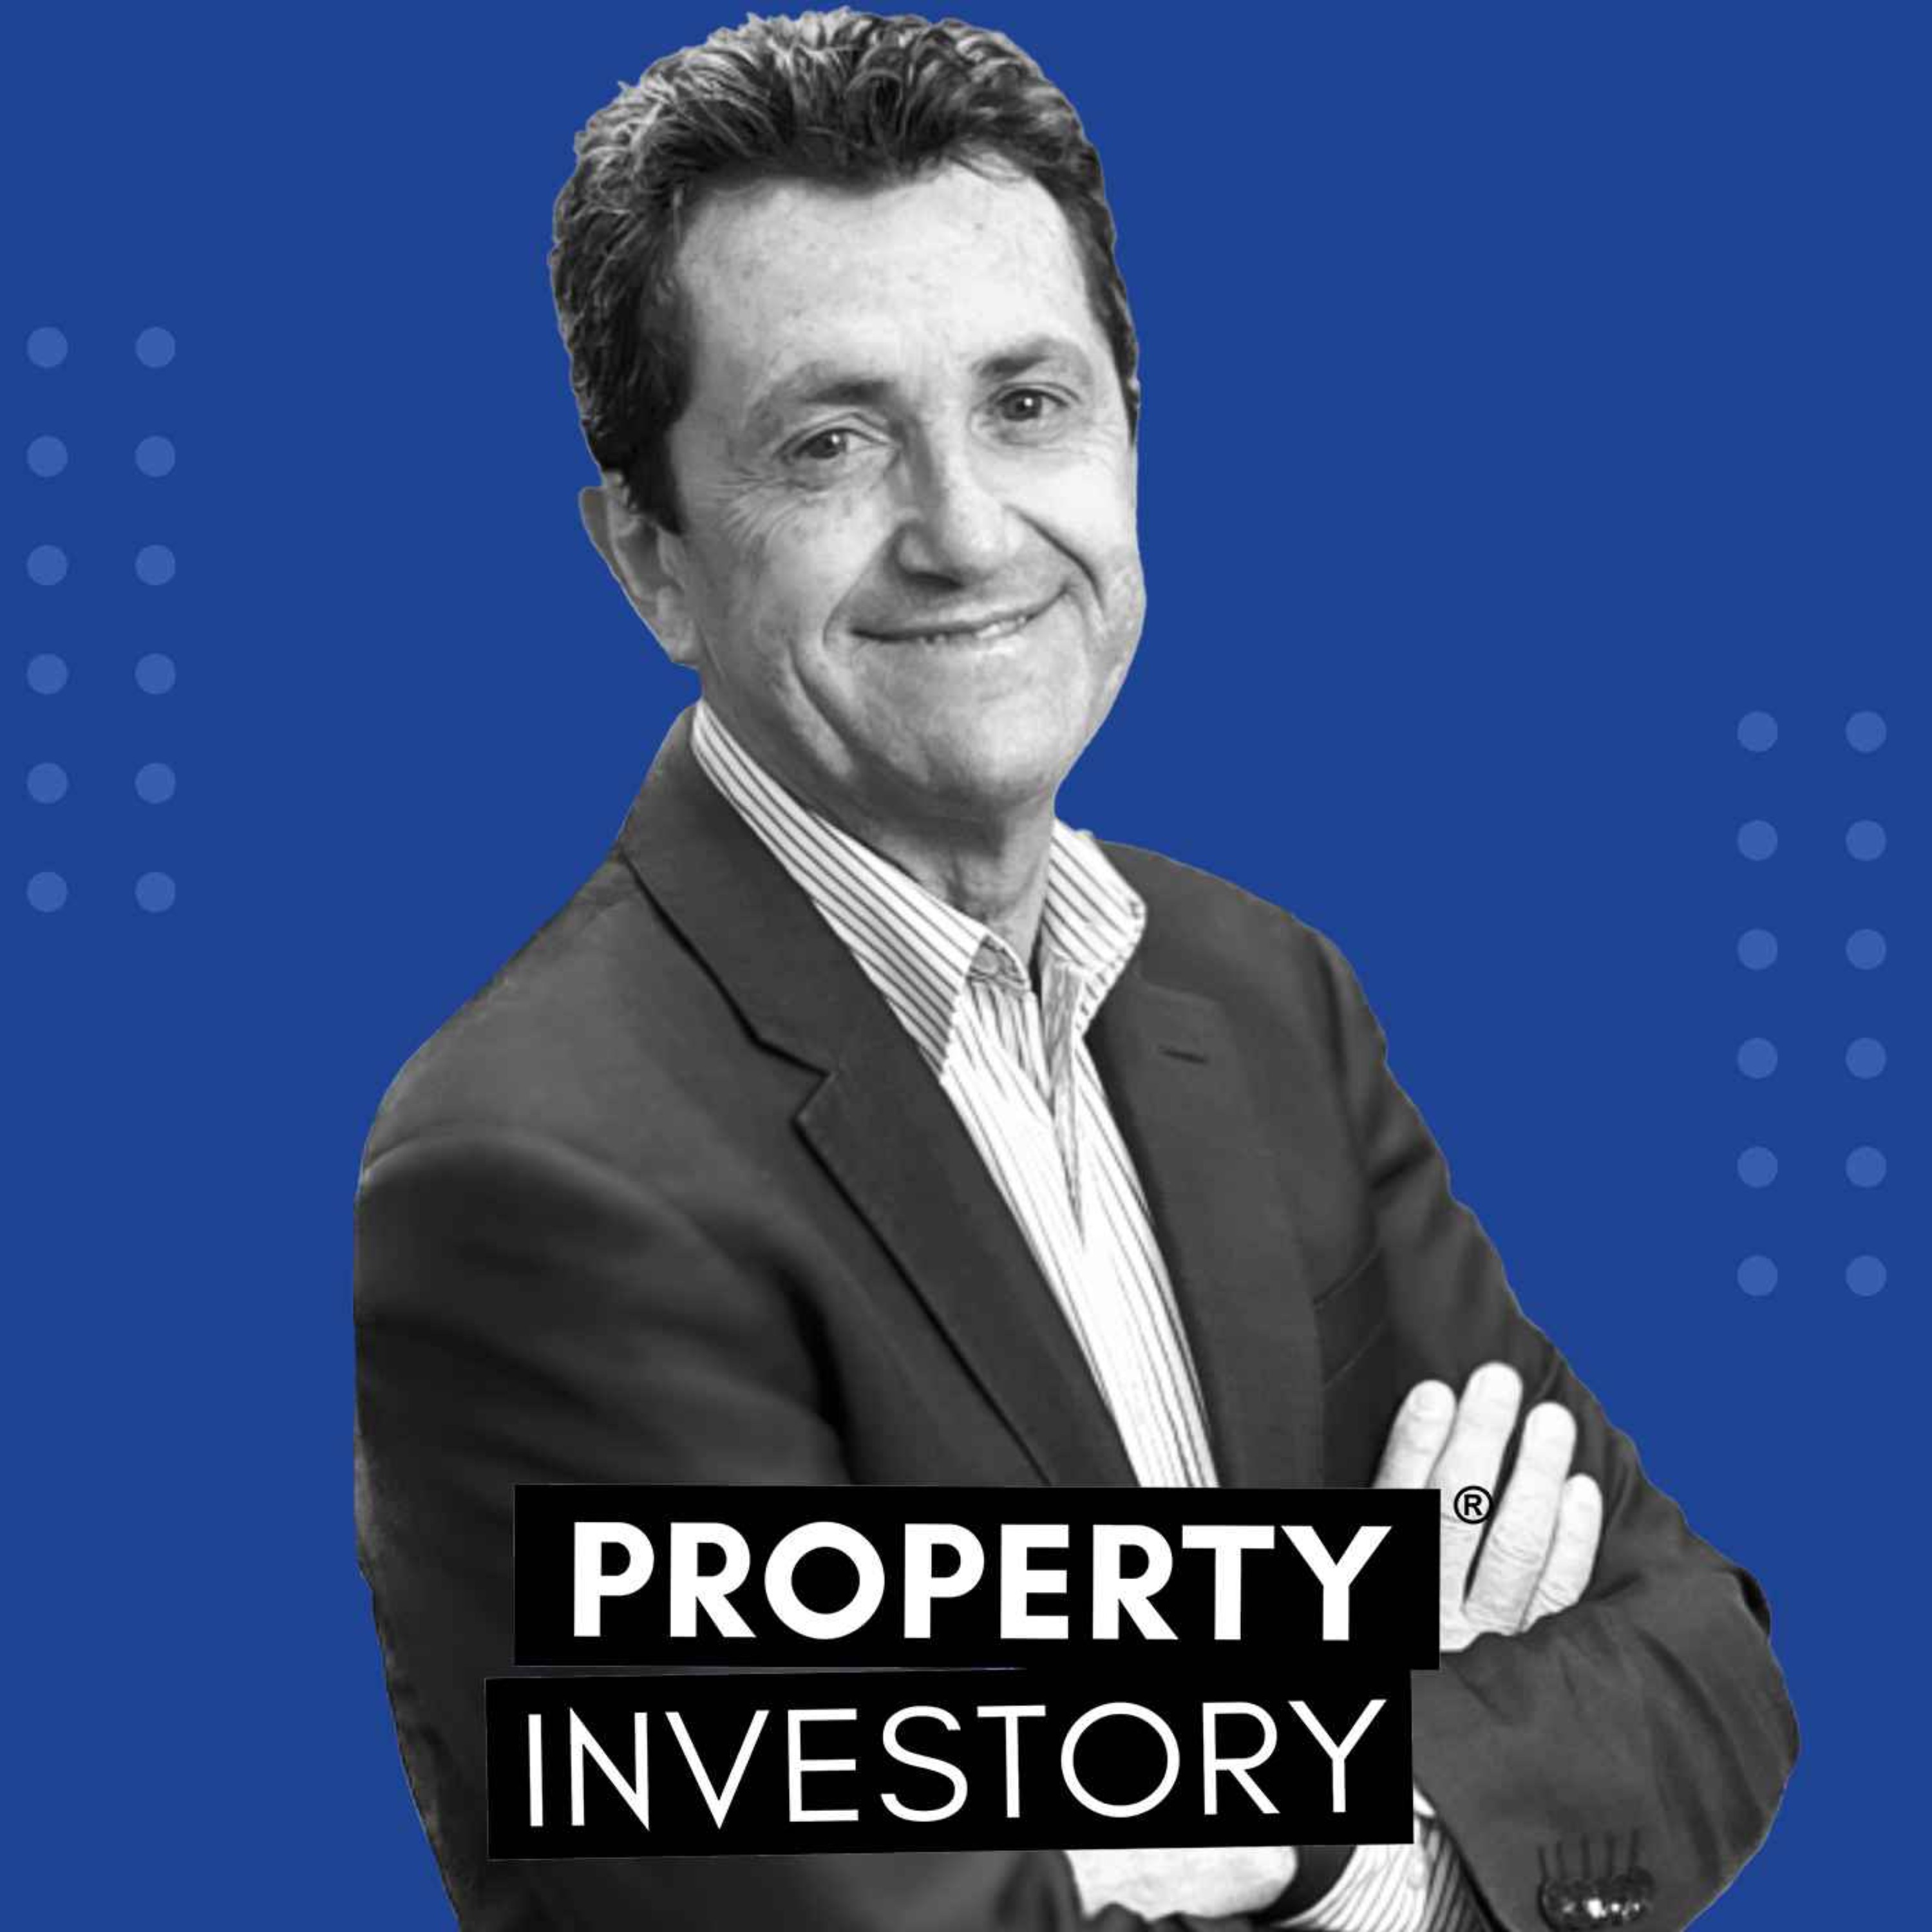 Joe Rossi on the Good, the Bad, and the Ugly in Property and Data